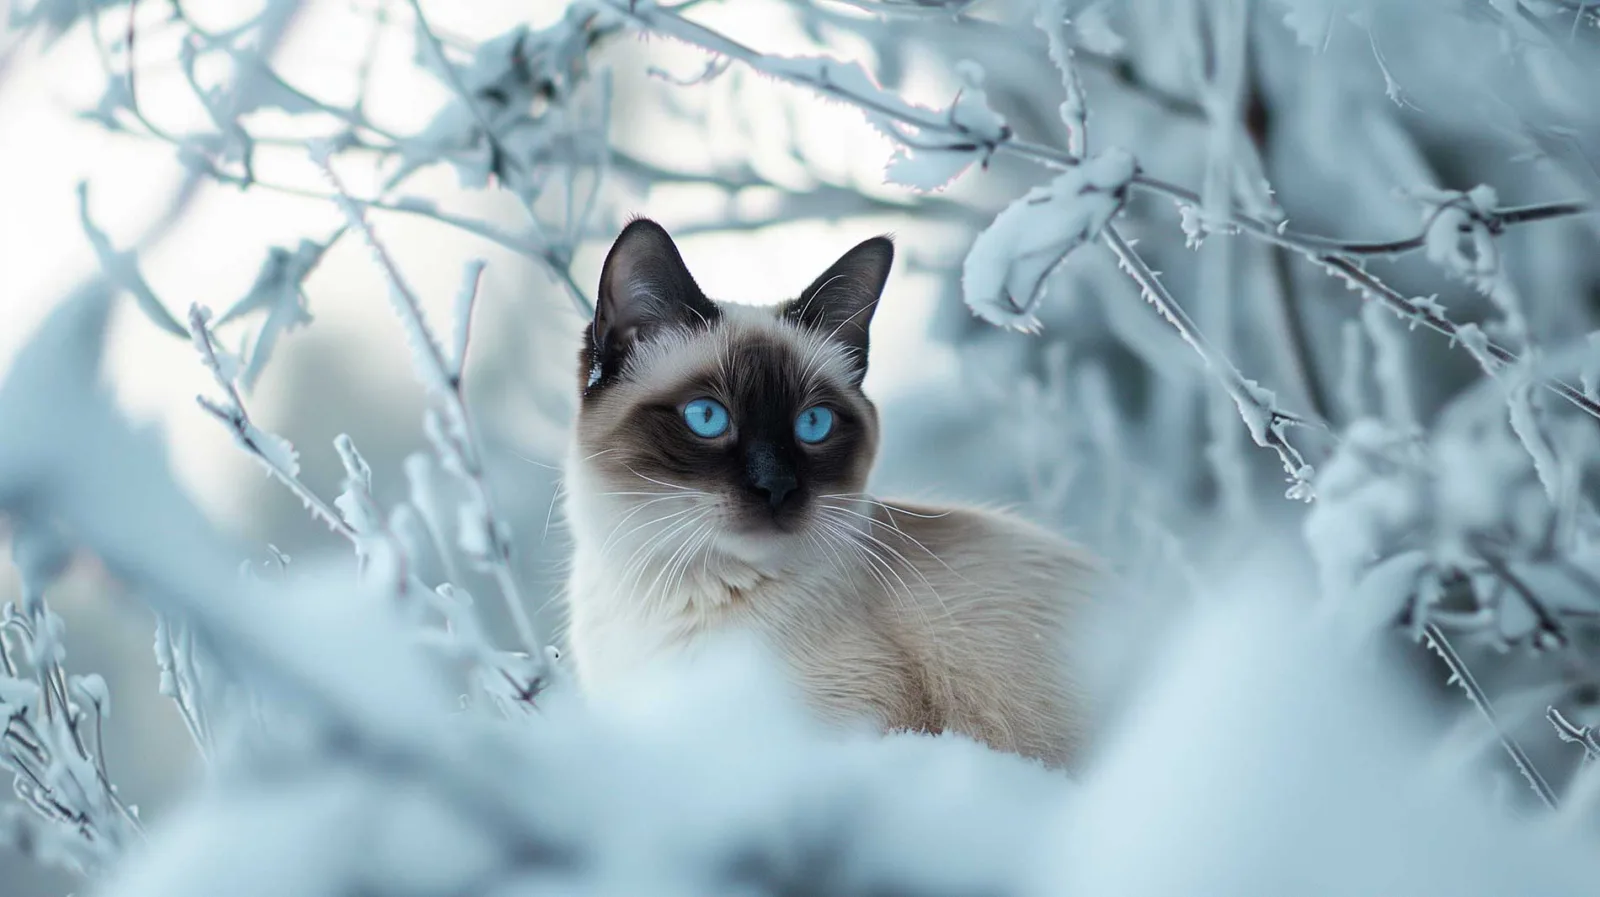 A Siamese cat sits amidst a snowy winter landscape. The cat's gaze is focused and alert. The background is a serene scene of snow-covered branches and icy twigs, enhancing the cold, tranquil atmosphere of the image.